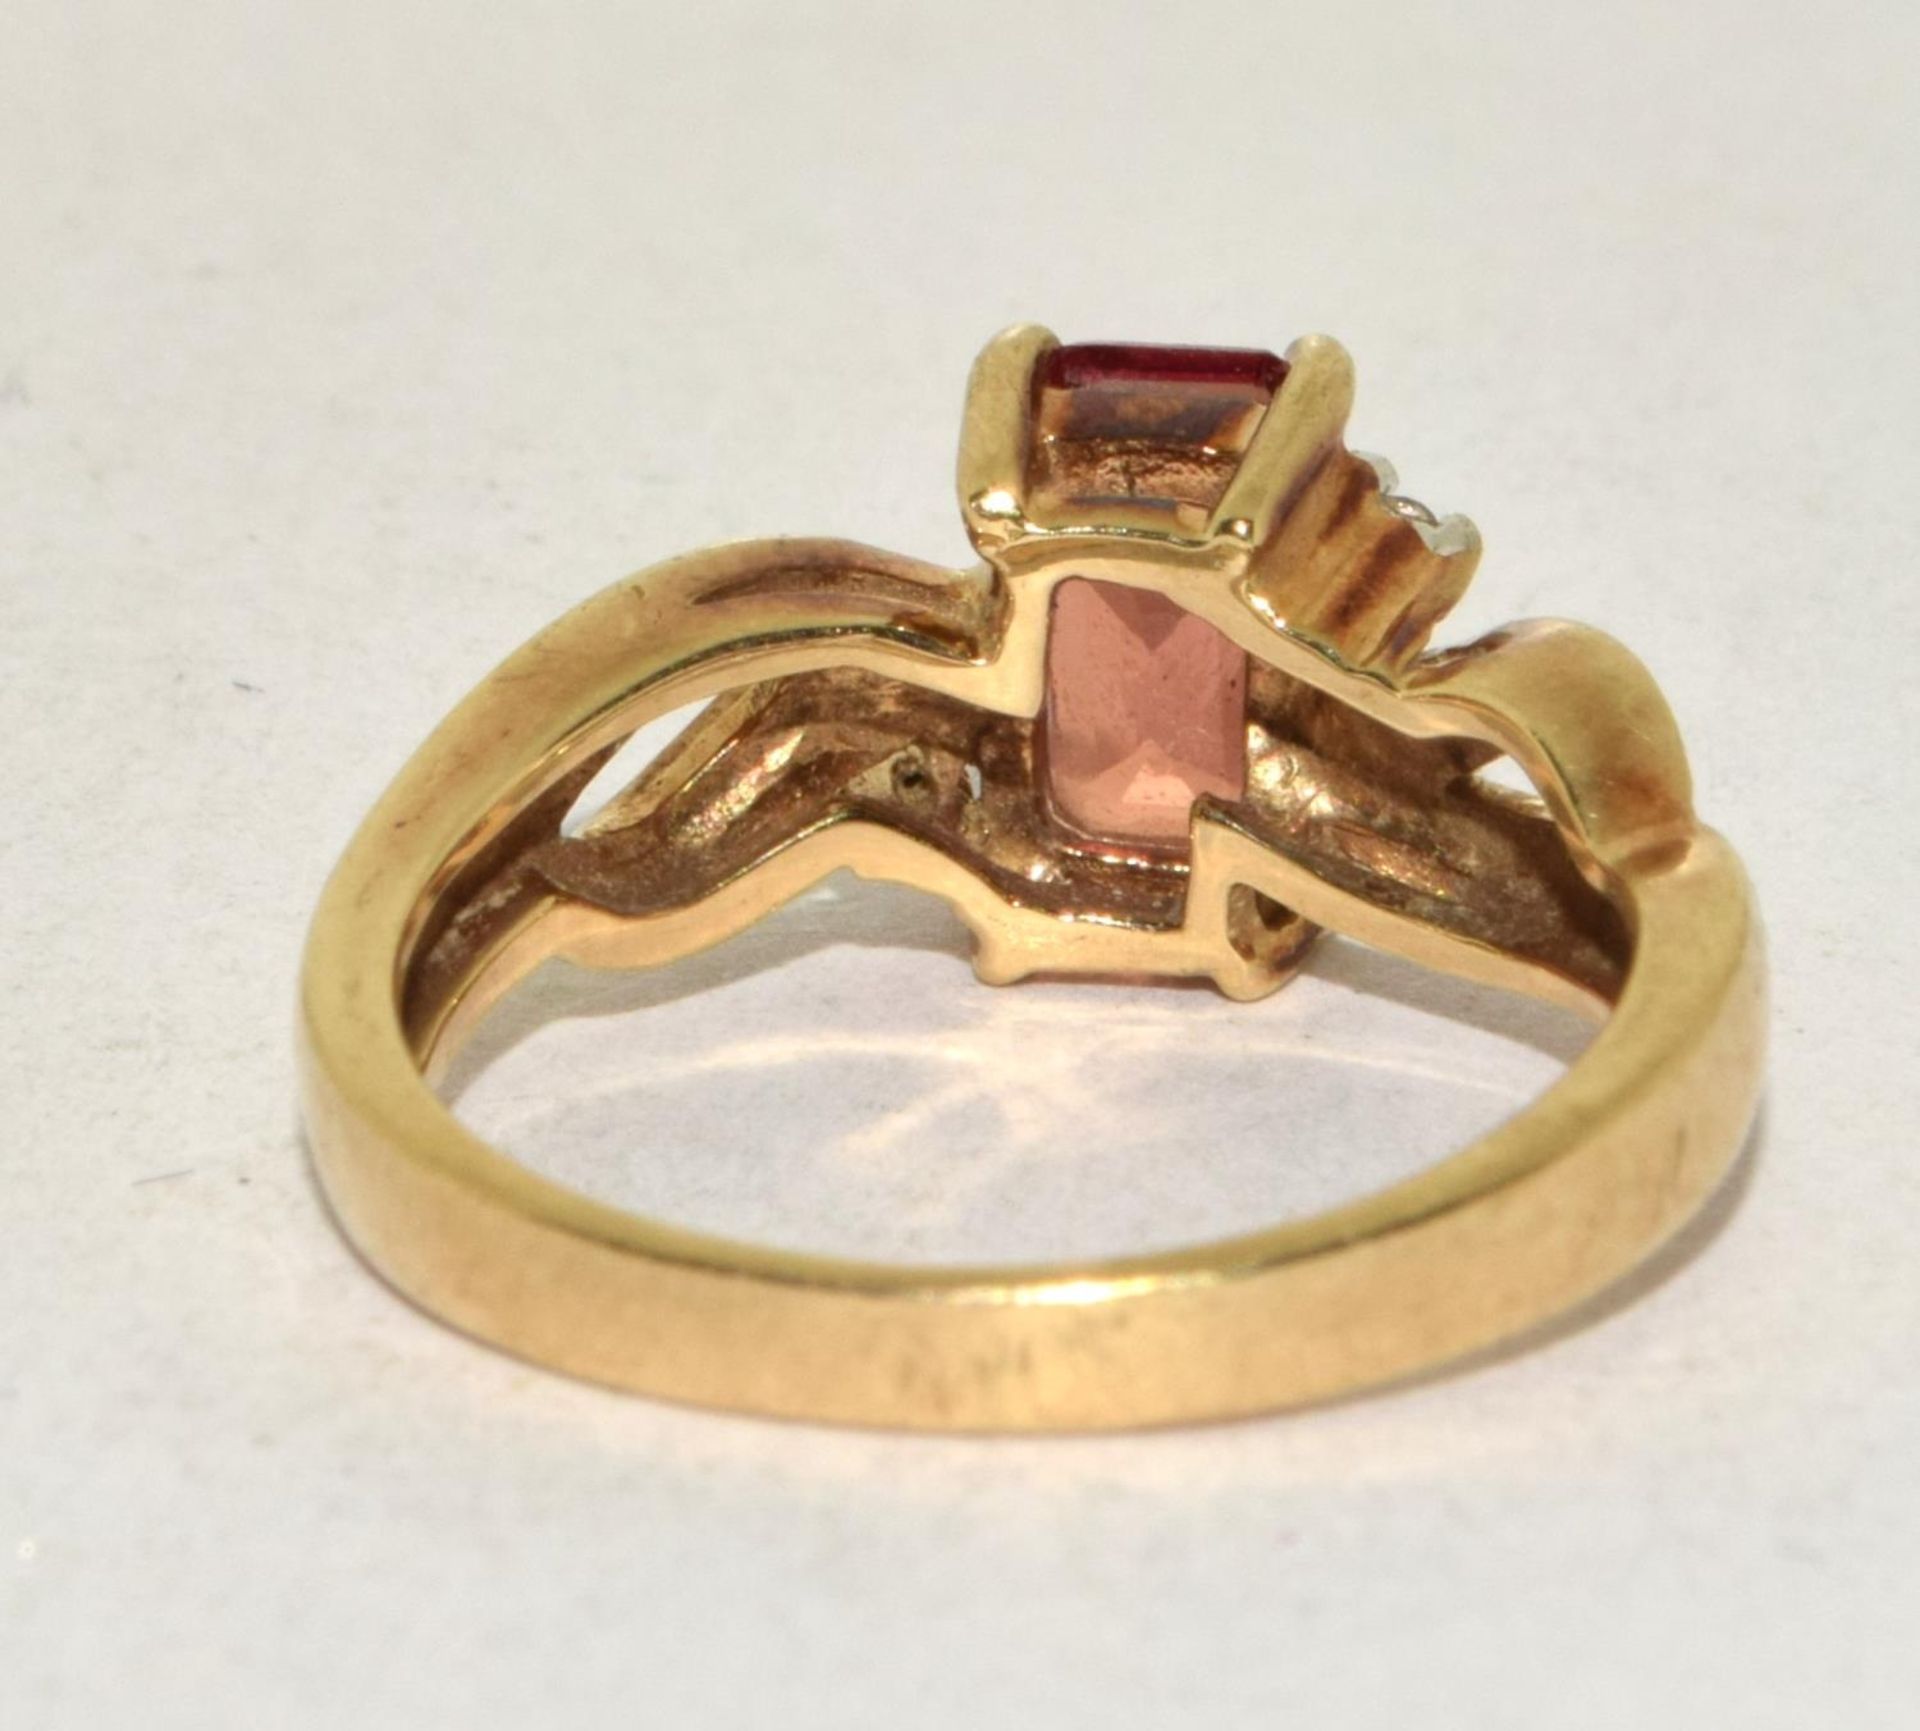 9ct gold ladies Diamond and Ruby ring size N - Image 3 of 5